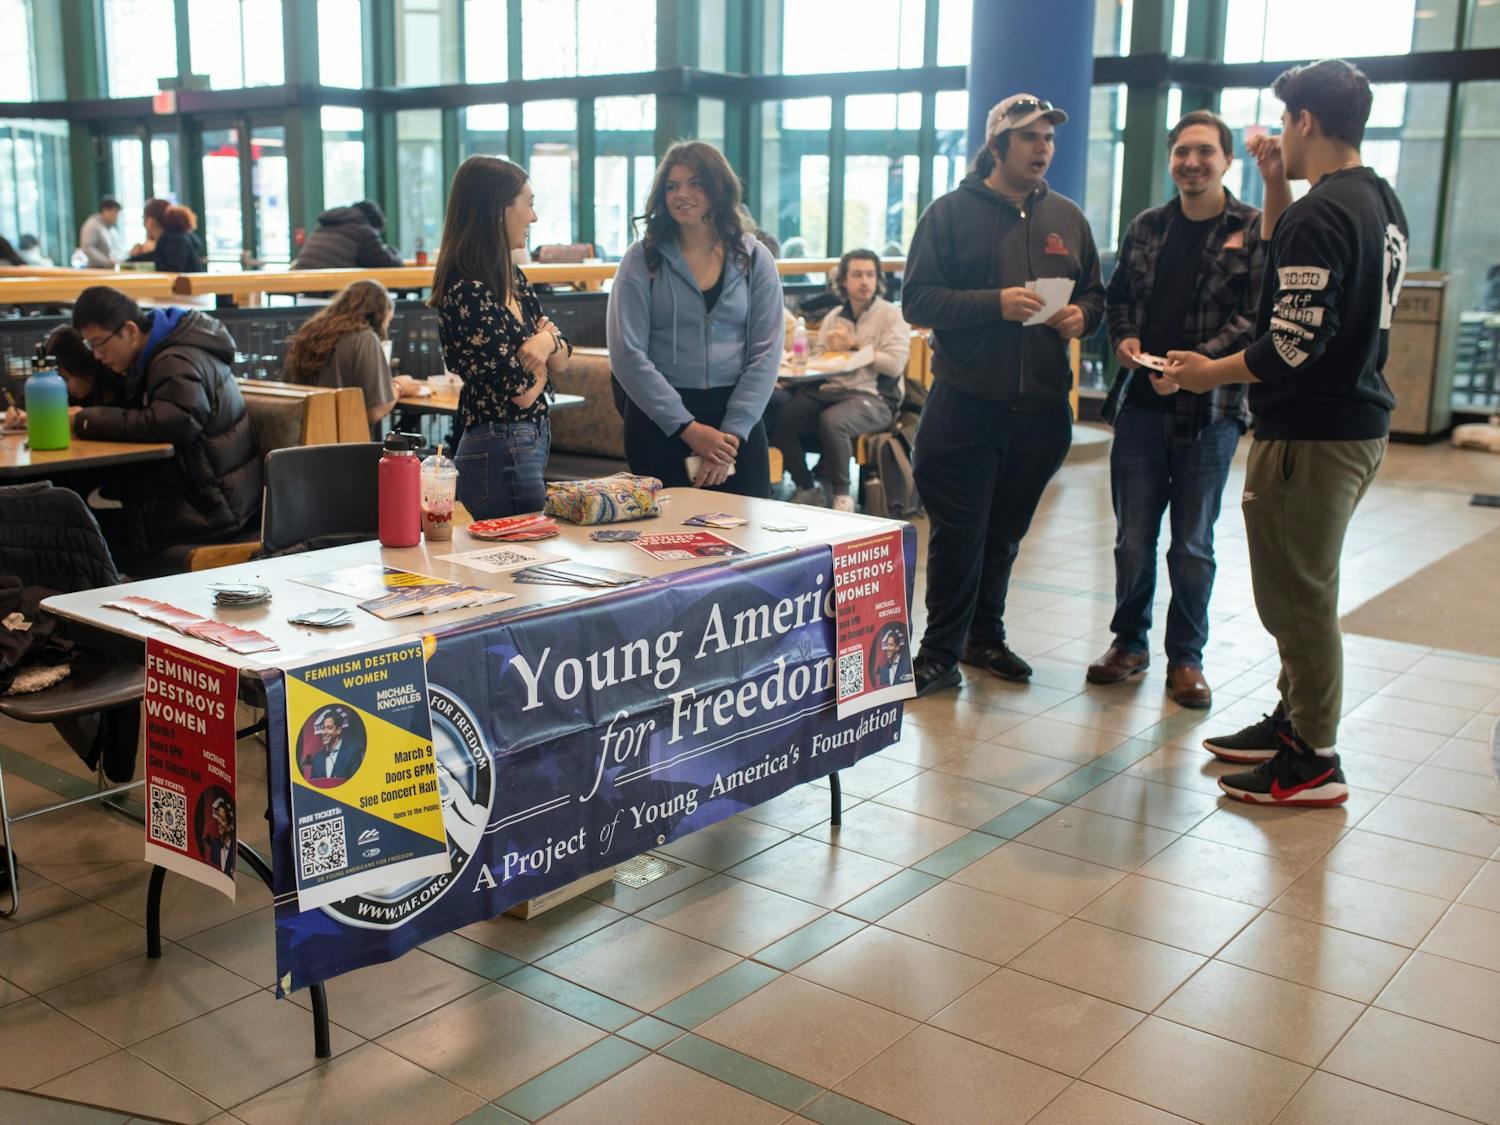 The Young Americans for Freedom are hosting Michael Knowles on campus this Thursday.